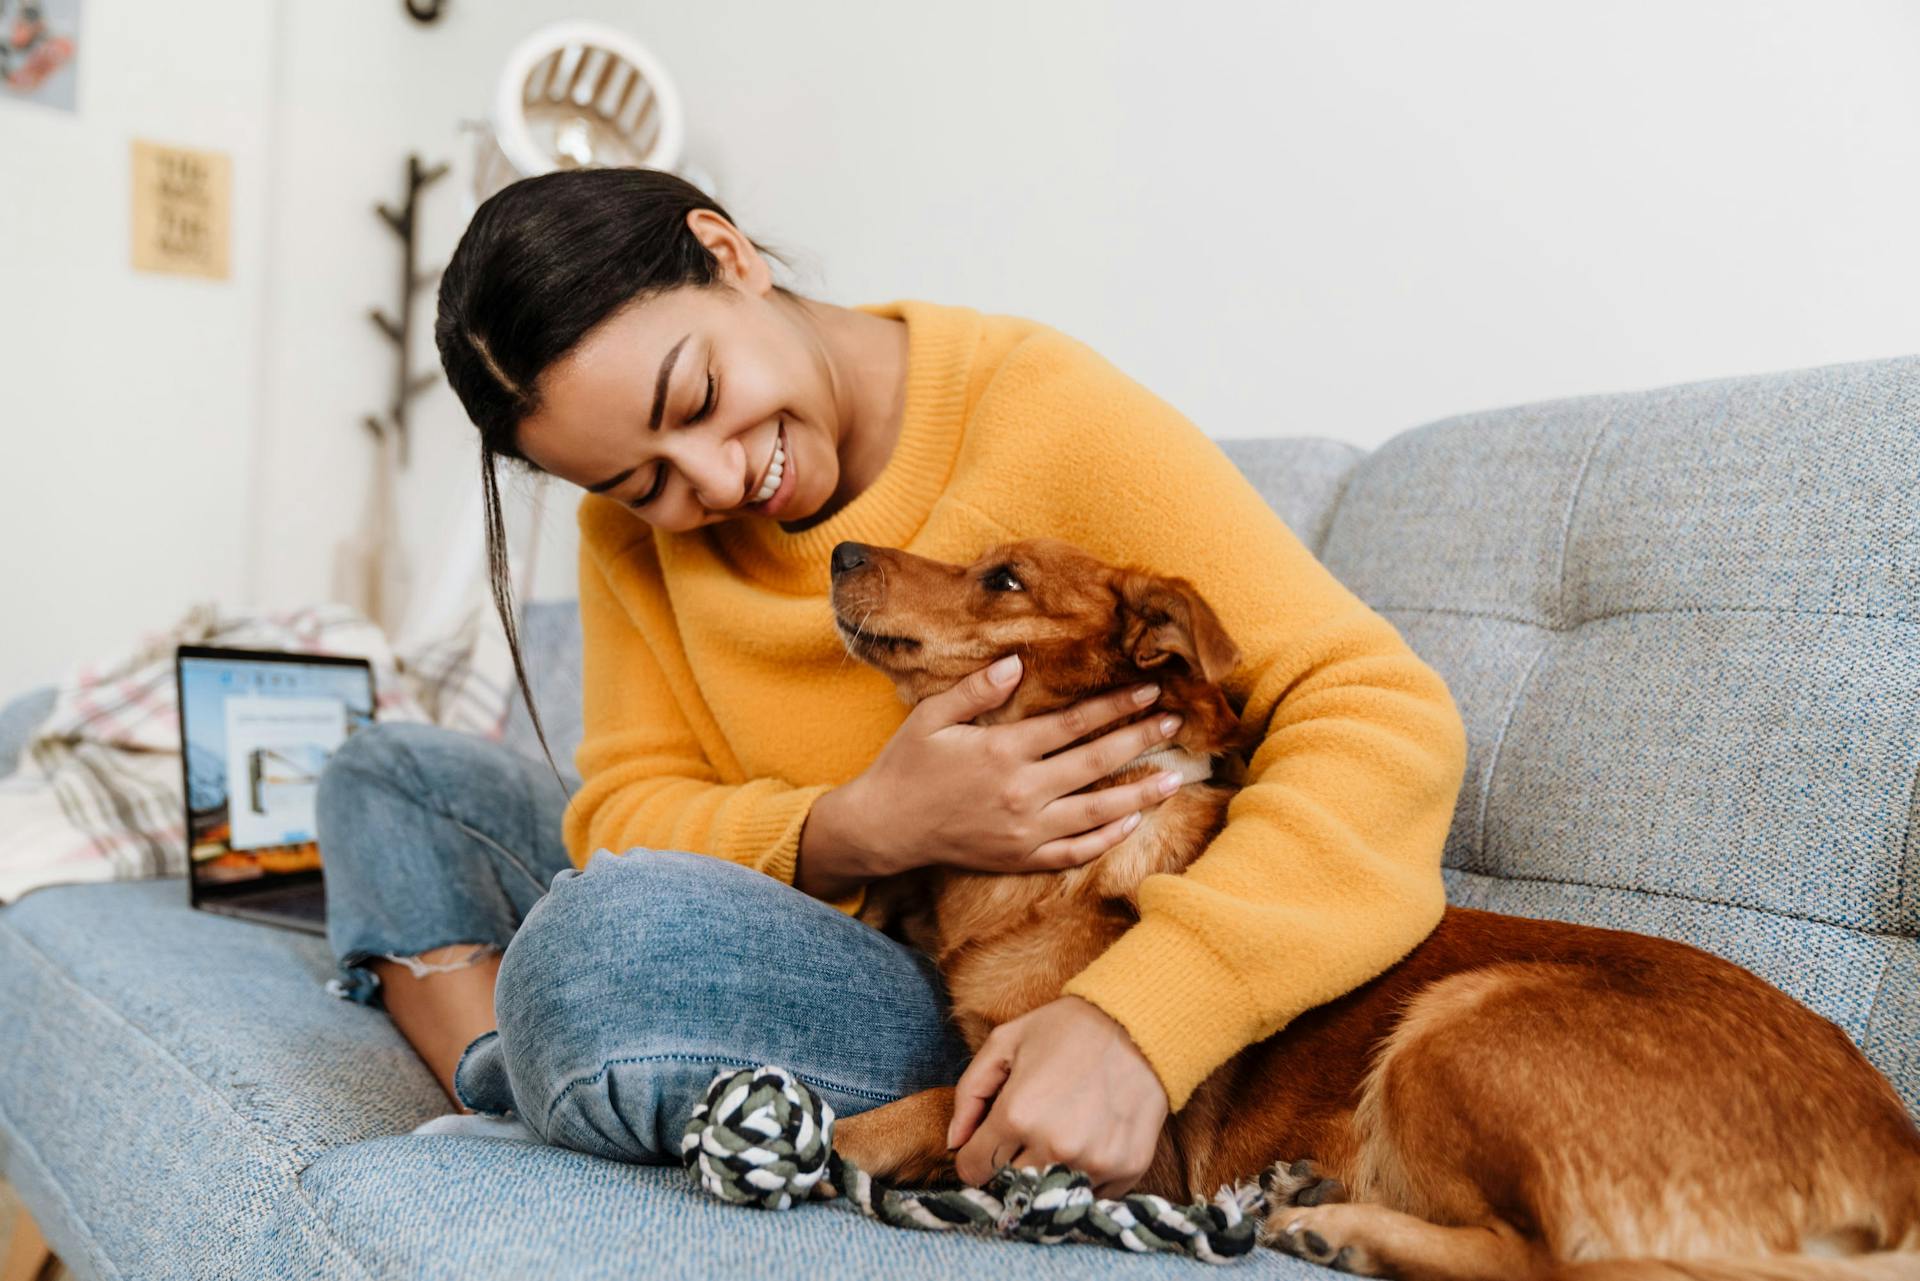 Woman snuggling dog on couch